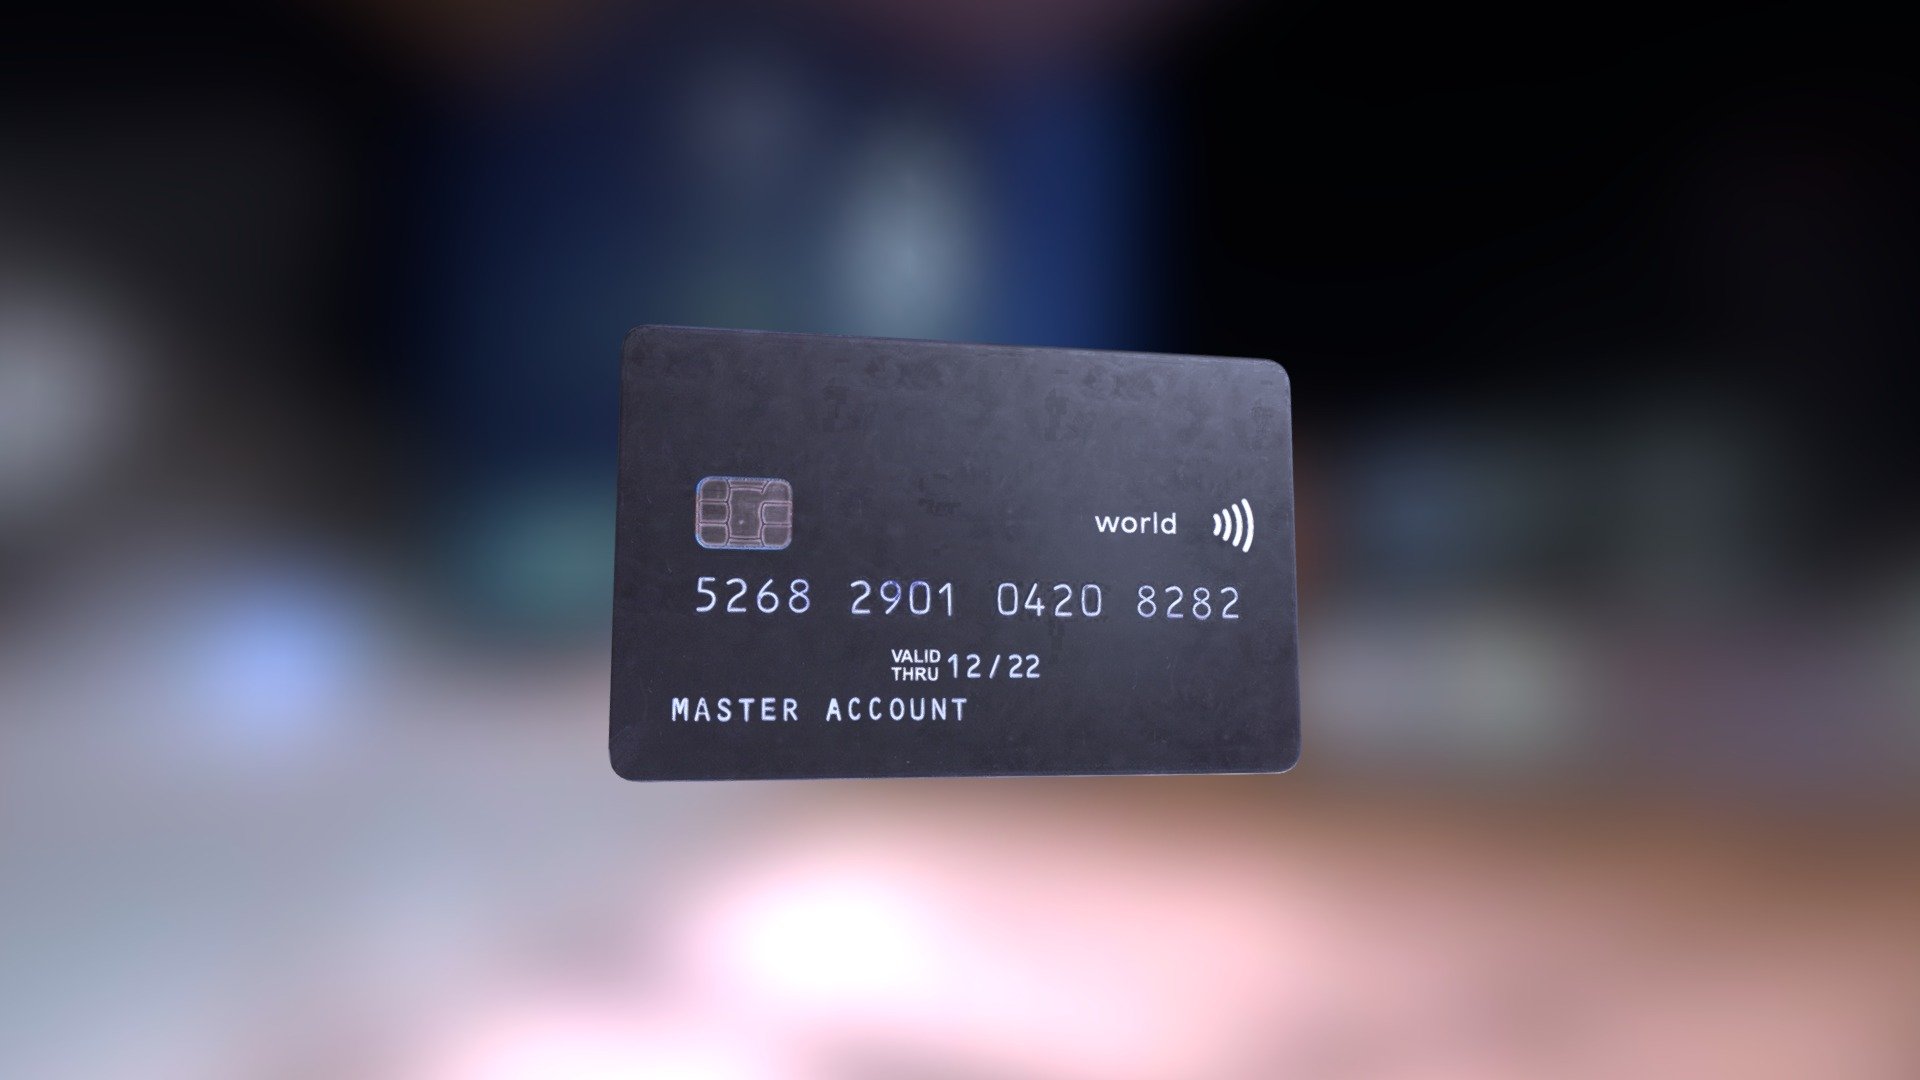 This debit credit card has an arbitrary number. In addition, I did not write the name of any fictitious or real bank. You can add this inscription to the BaseColor texture yourself in Photoshop or in another graphics editor from scratch. 3d model is low poly and game-ready.

Real scale - Units: cm ~ 8,57 x 5,39 x 0,054 cm.

Formats:


.blend (Mesh + material (Principled BSDF) + Textures PBR - Roughness/Metallic) - Blender (ver. 3.1.2)
.max (Mesh + material (Vray 3.60.03) + Textures Specular/Glossiness) - 3ds Max 2018
.tbscene (Mesh + Textures PBR - Roughness/Metallic, Marmoset Toolbag 3 (Ver 3.08))
.FBX (only mesh! without materials/textures)
.glb (Triangulated, Mesh + Textures PBR Roughness/Metallic (compressed in format))
.gltf (Triangulated, Mesh + Textures PBR Roughness/Metallic - .jpg )
.unitypackage (Triangulated, Mesh + Textures - .tga)
.zip (folder textures, PBR Roughness/Metallic)
.zip (folder textures, PBR Specular/Glossiness)
 - Credit Card - 3D model by Universe_3D 3d model